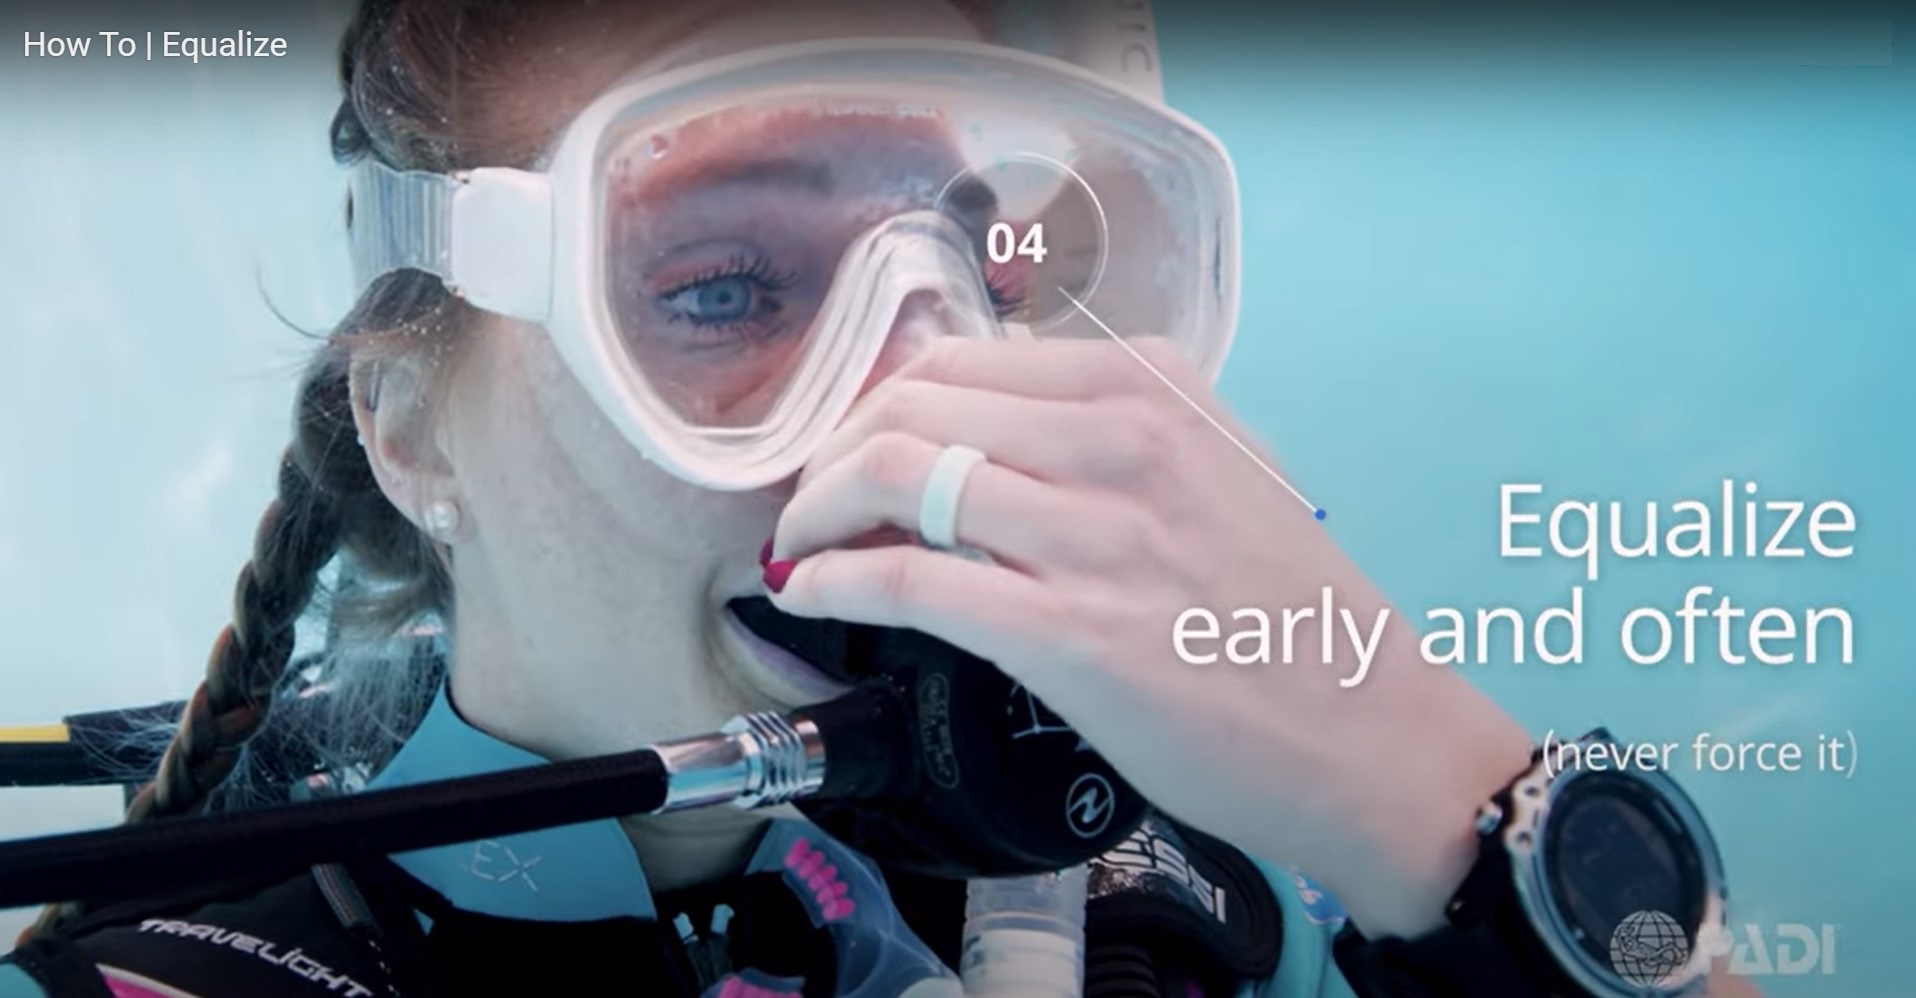 10 Scuba Diving Tips and Advice for Easy Equalizing (Divers Alert Network)